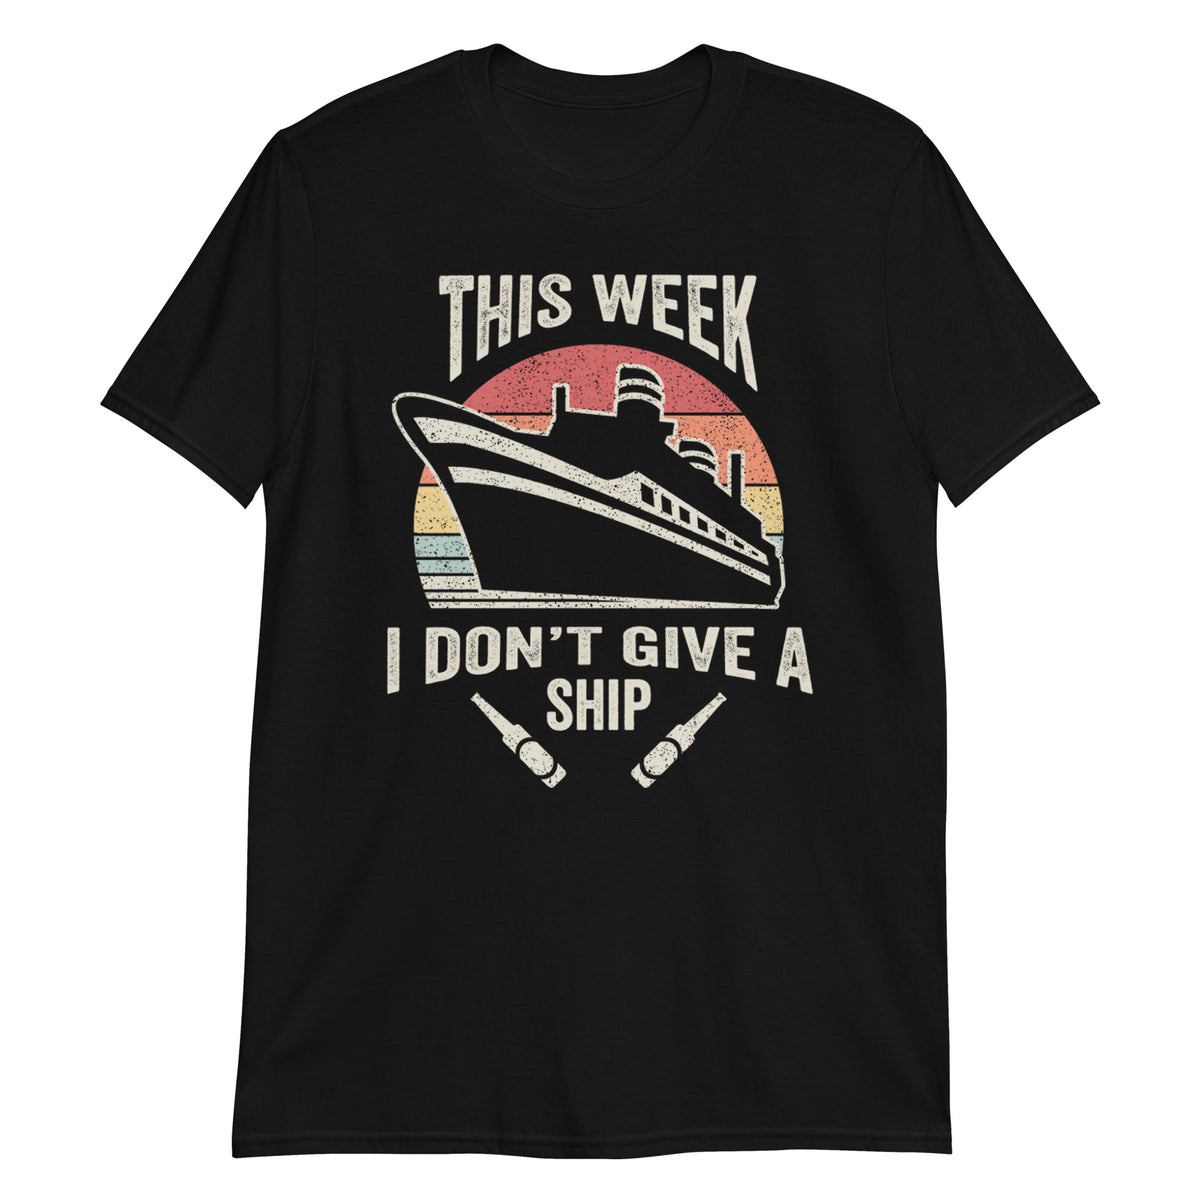 This Week I Don't Give a Shit T-Shirt